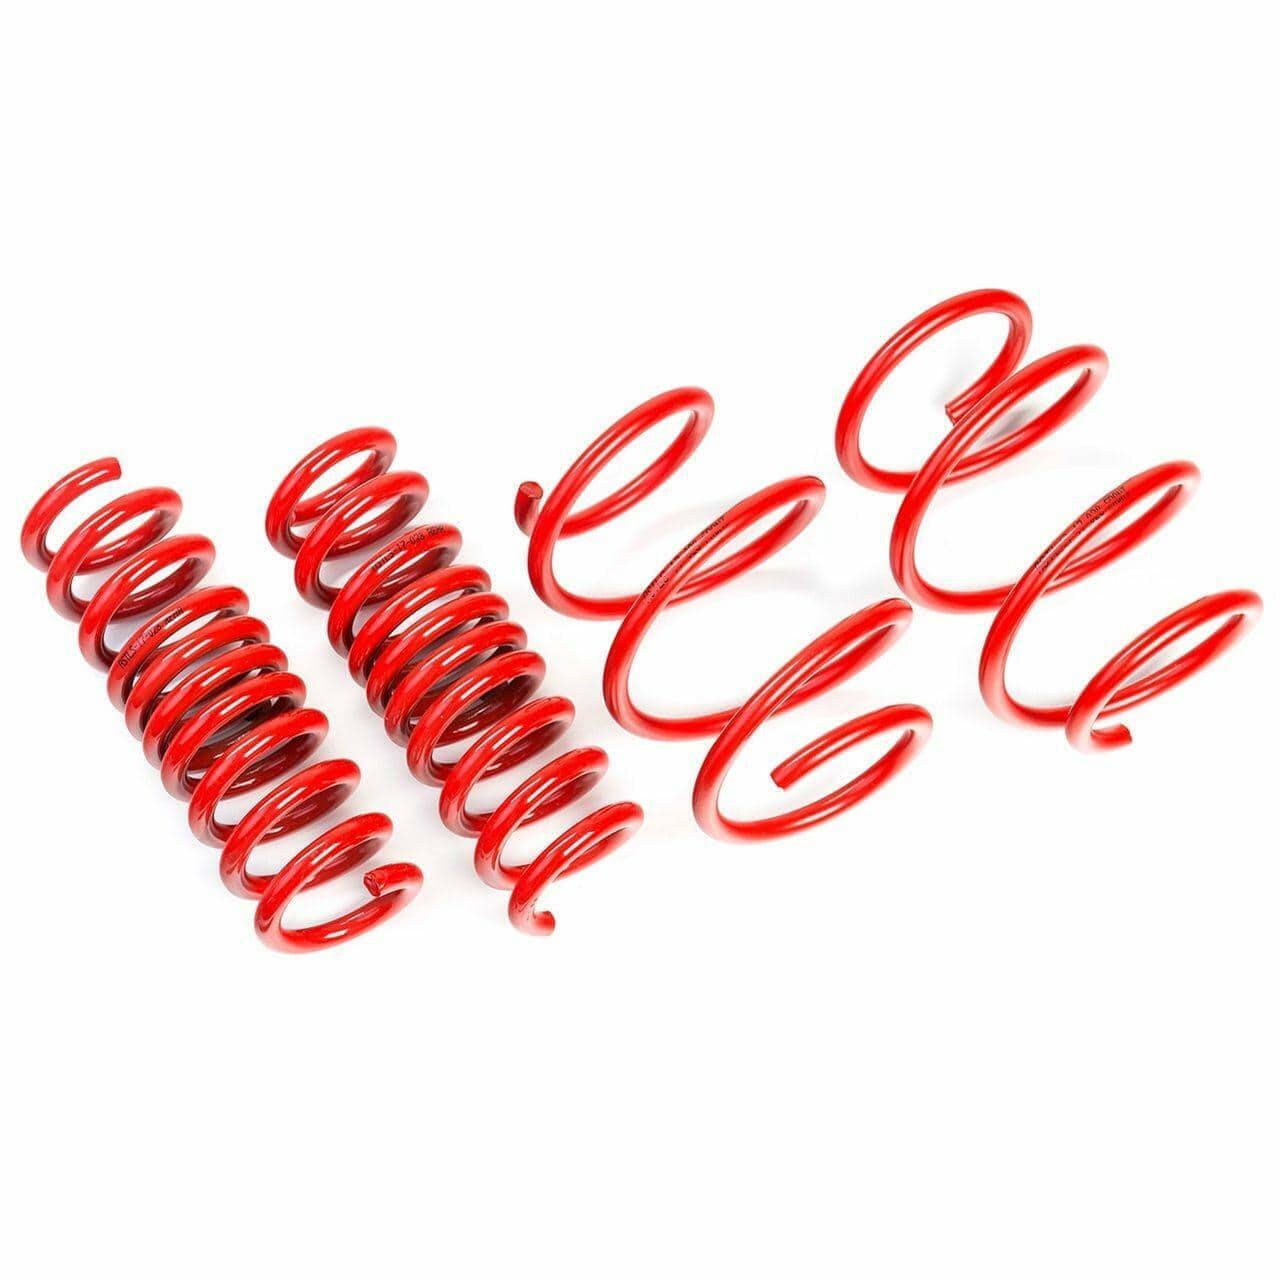 AST Suspension Lowering Springs (35MM/35MM) - 1998-2003 Honda Accord 3.0 V6 Coupe (CG) ASTLS-14-885